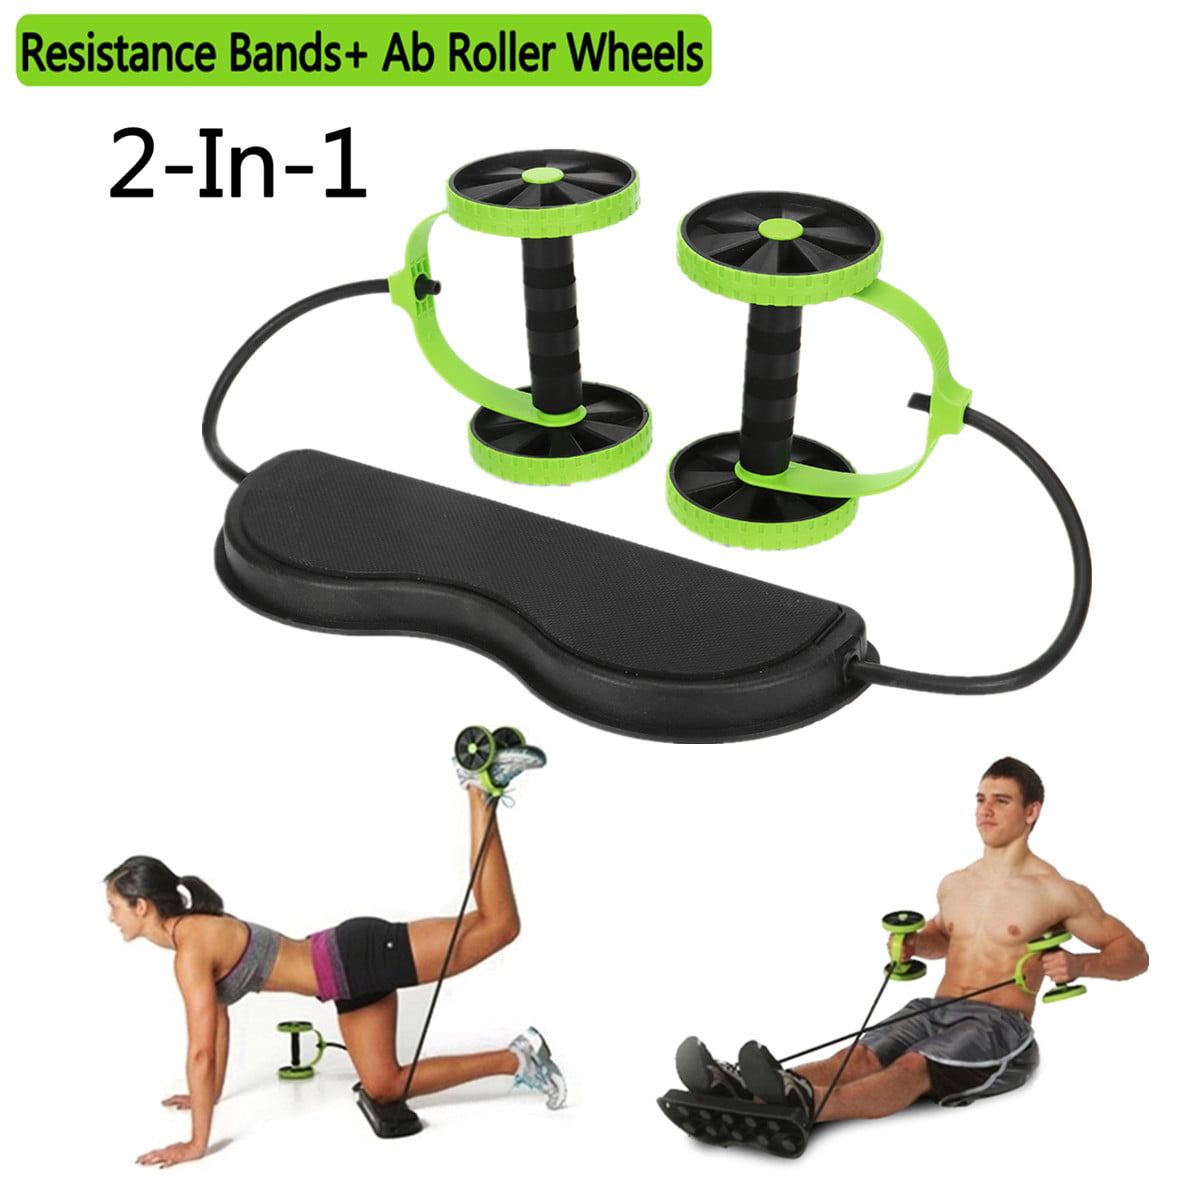 Abs Roller Ab Wheel Multifunctional Home Workout Chest Leg Exercises Training 